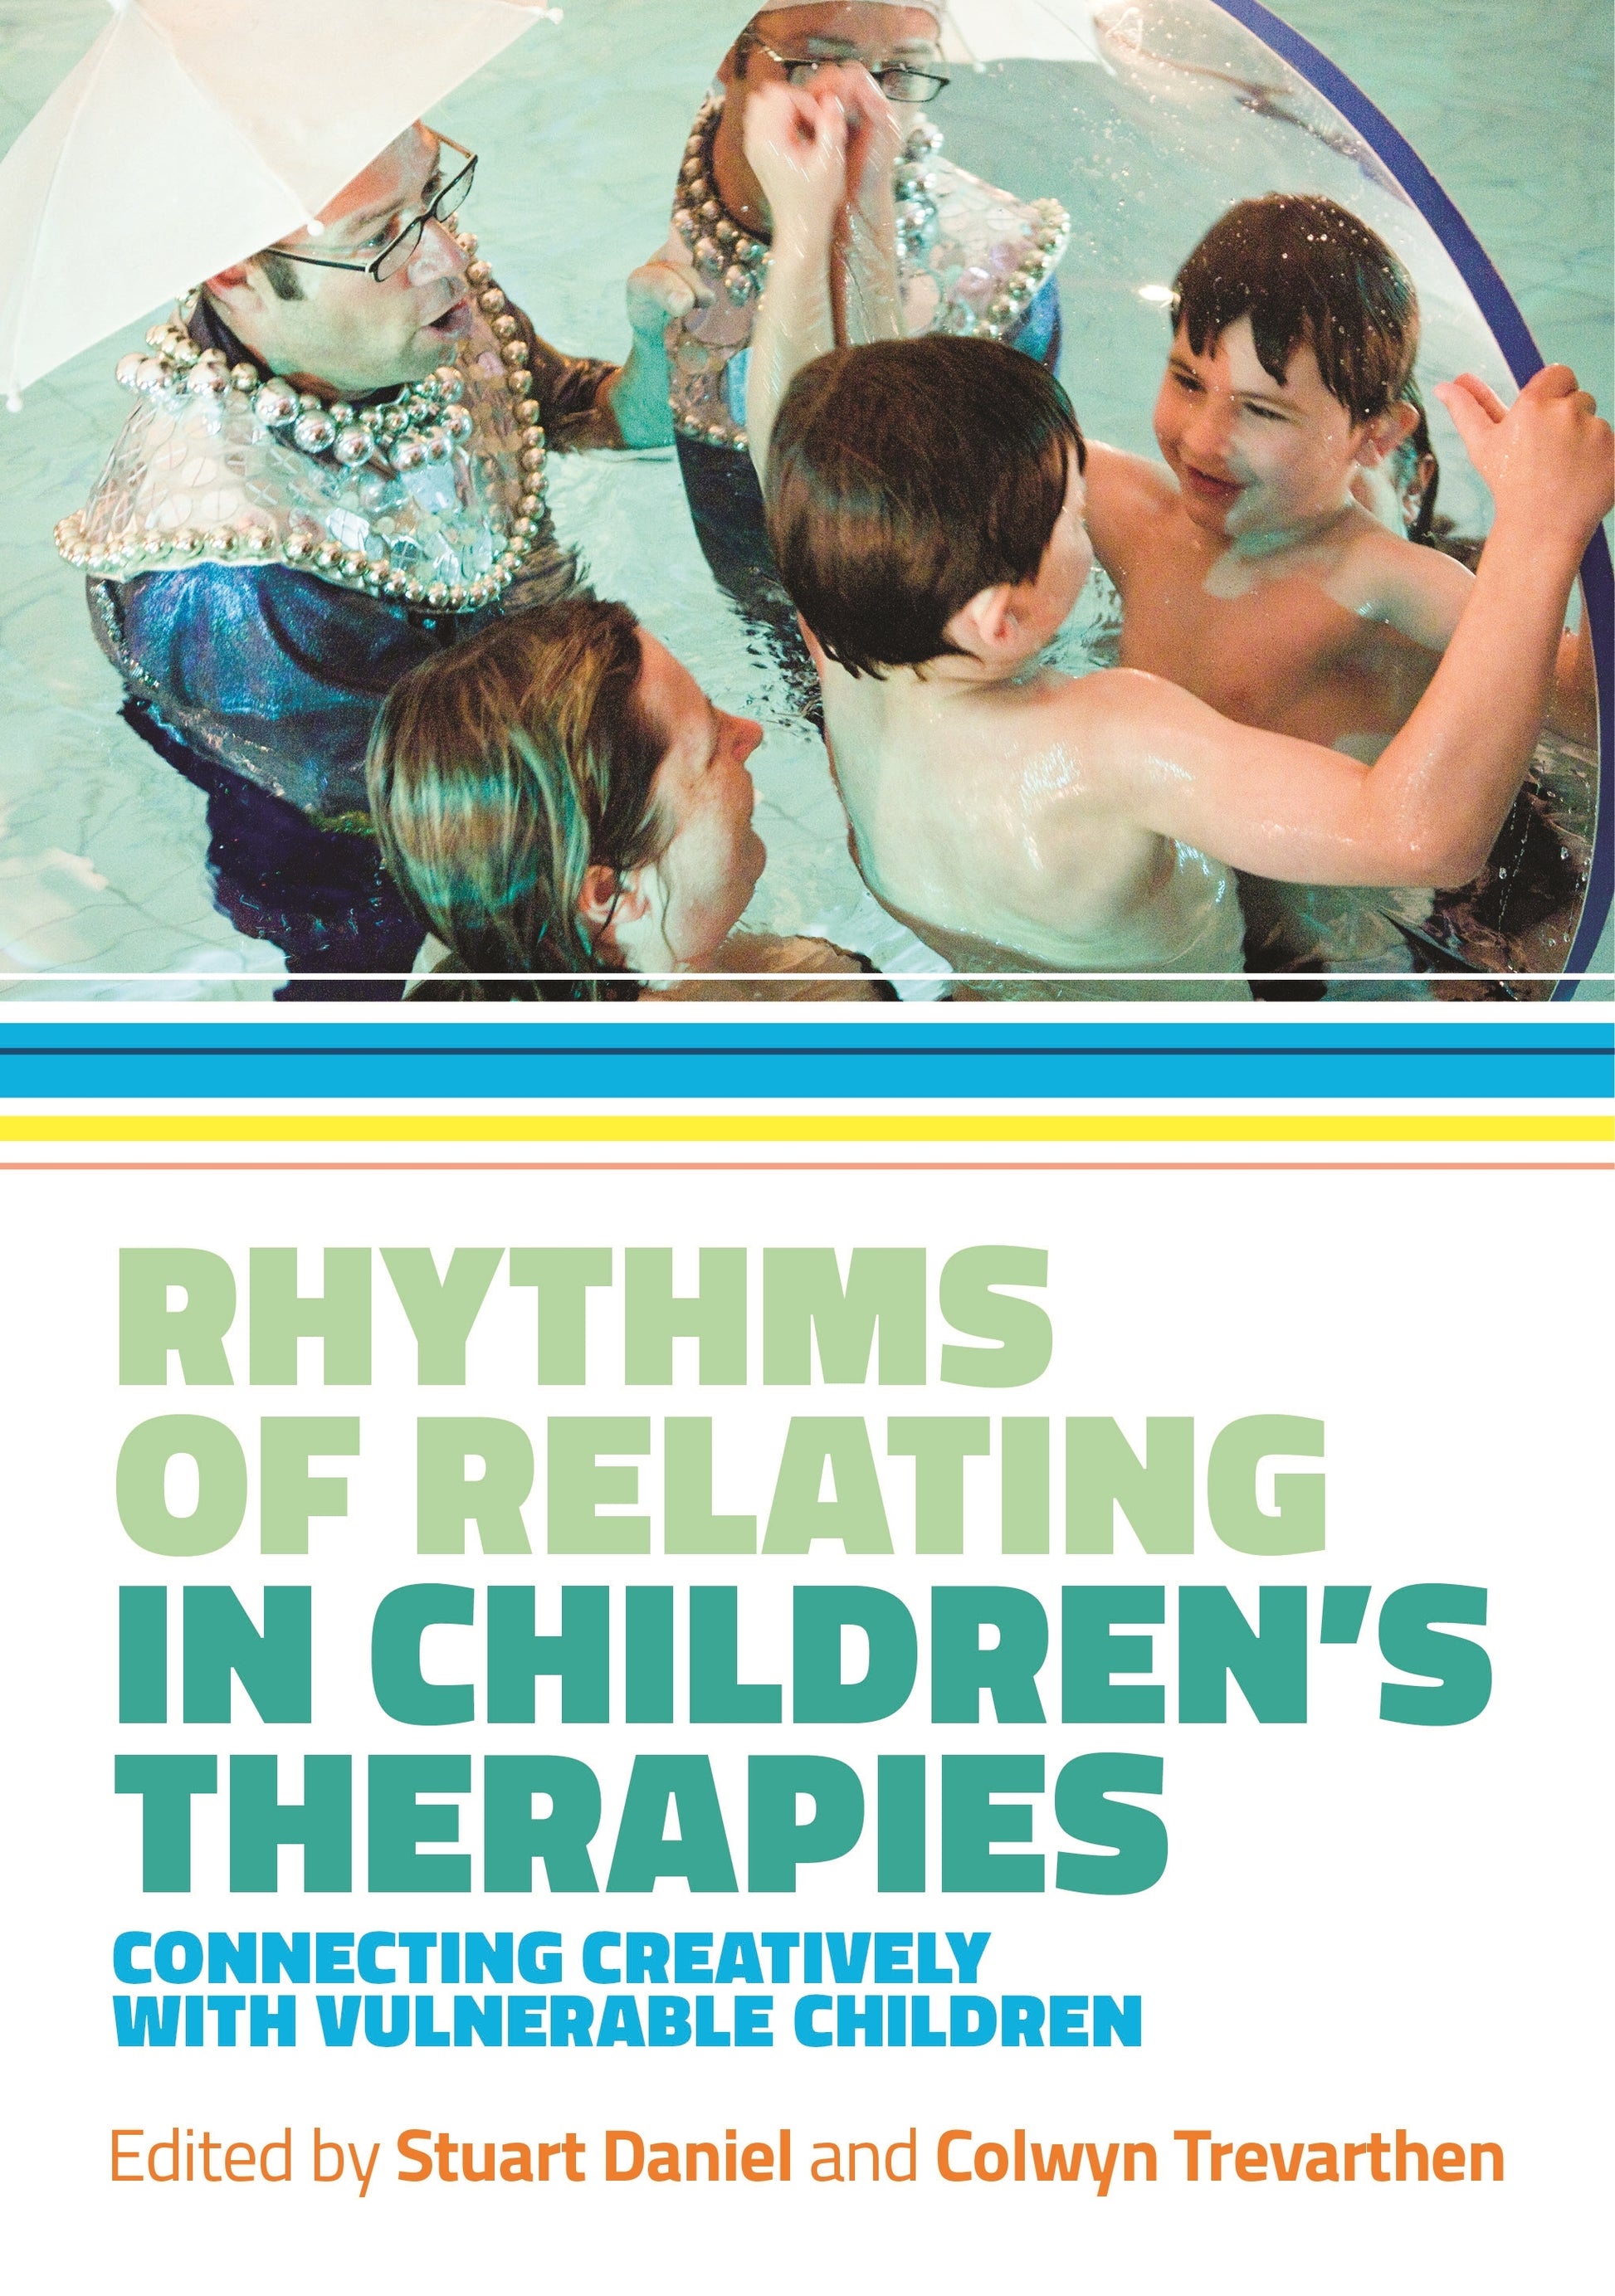 Rhythms of Relating in Children's Therapies by Colwyn Trevarthen, Stuart Daniel, No Author Listed